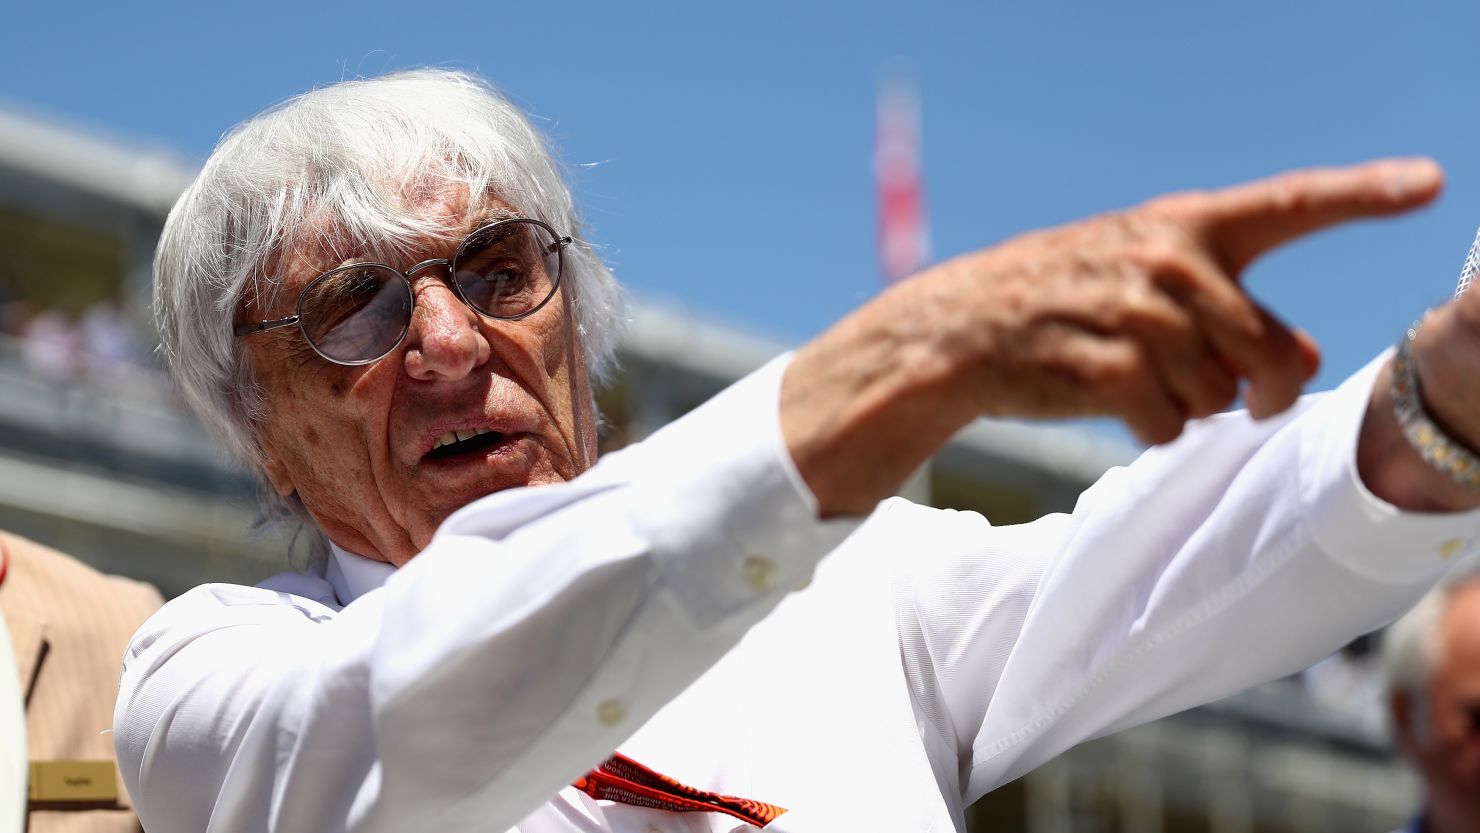 F1 boss Bernie Ecclestone has been critical of the dominance enjoyed by the Mercedes team.